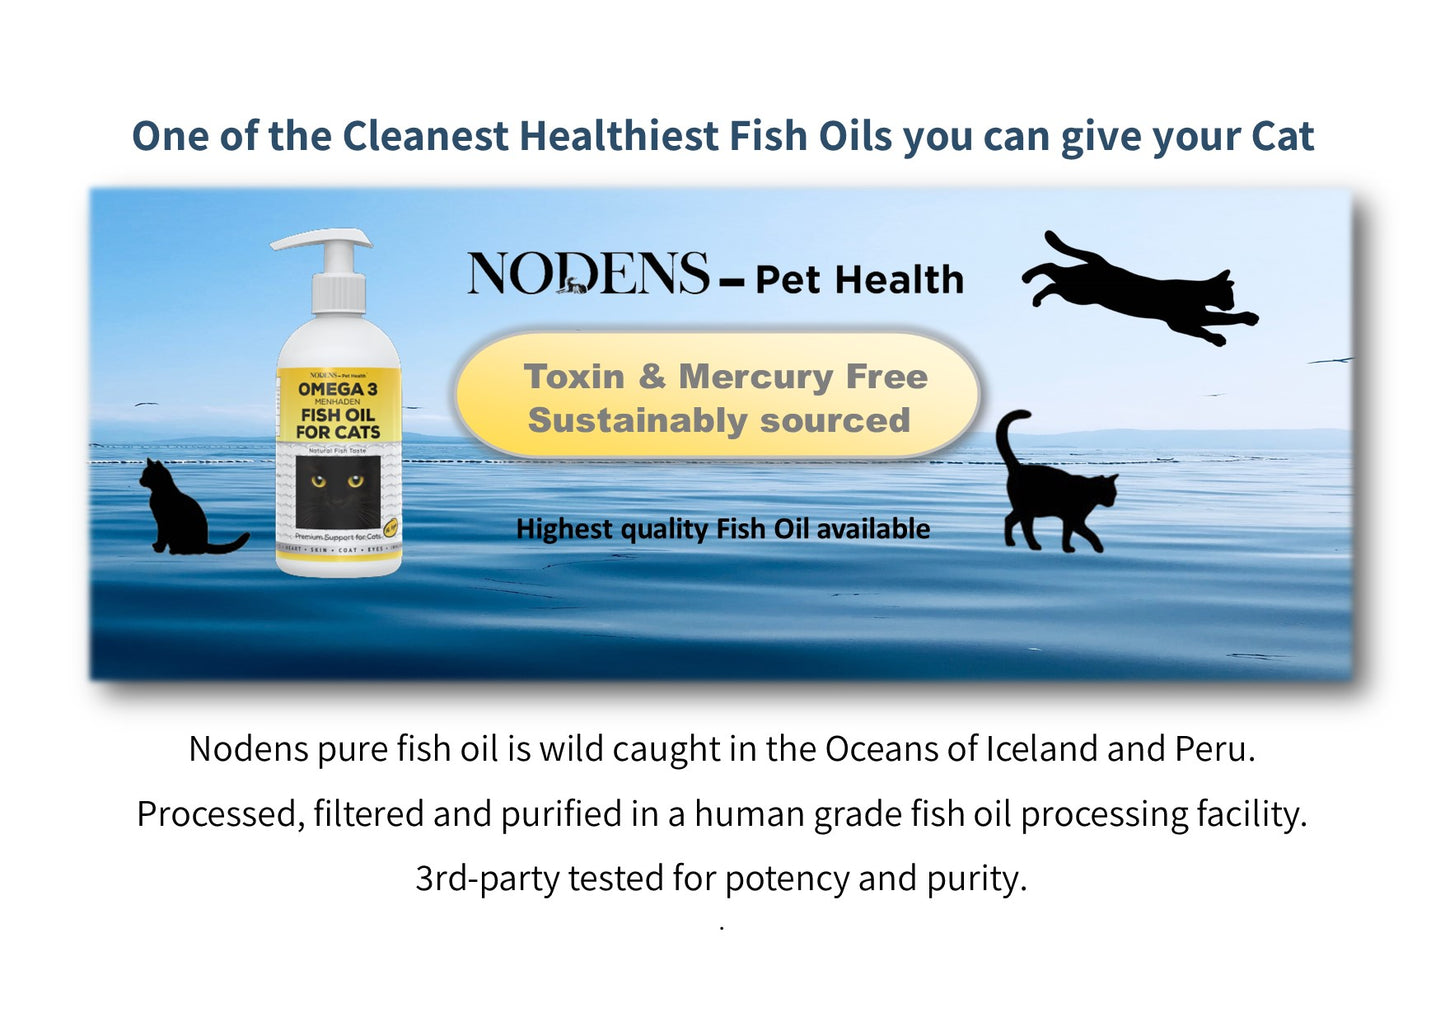 Nodens Highest Quality Fish oil available